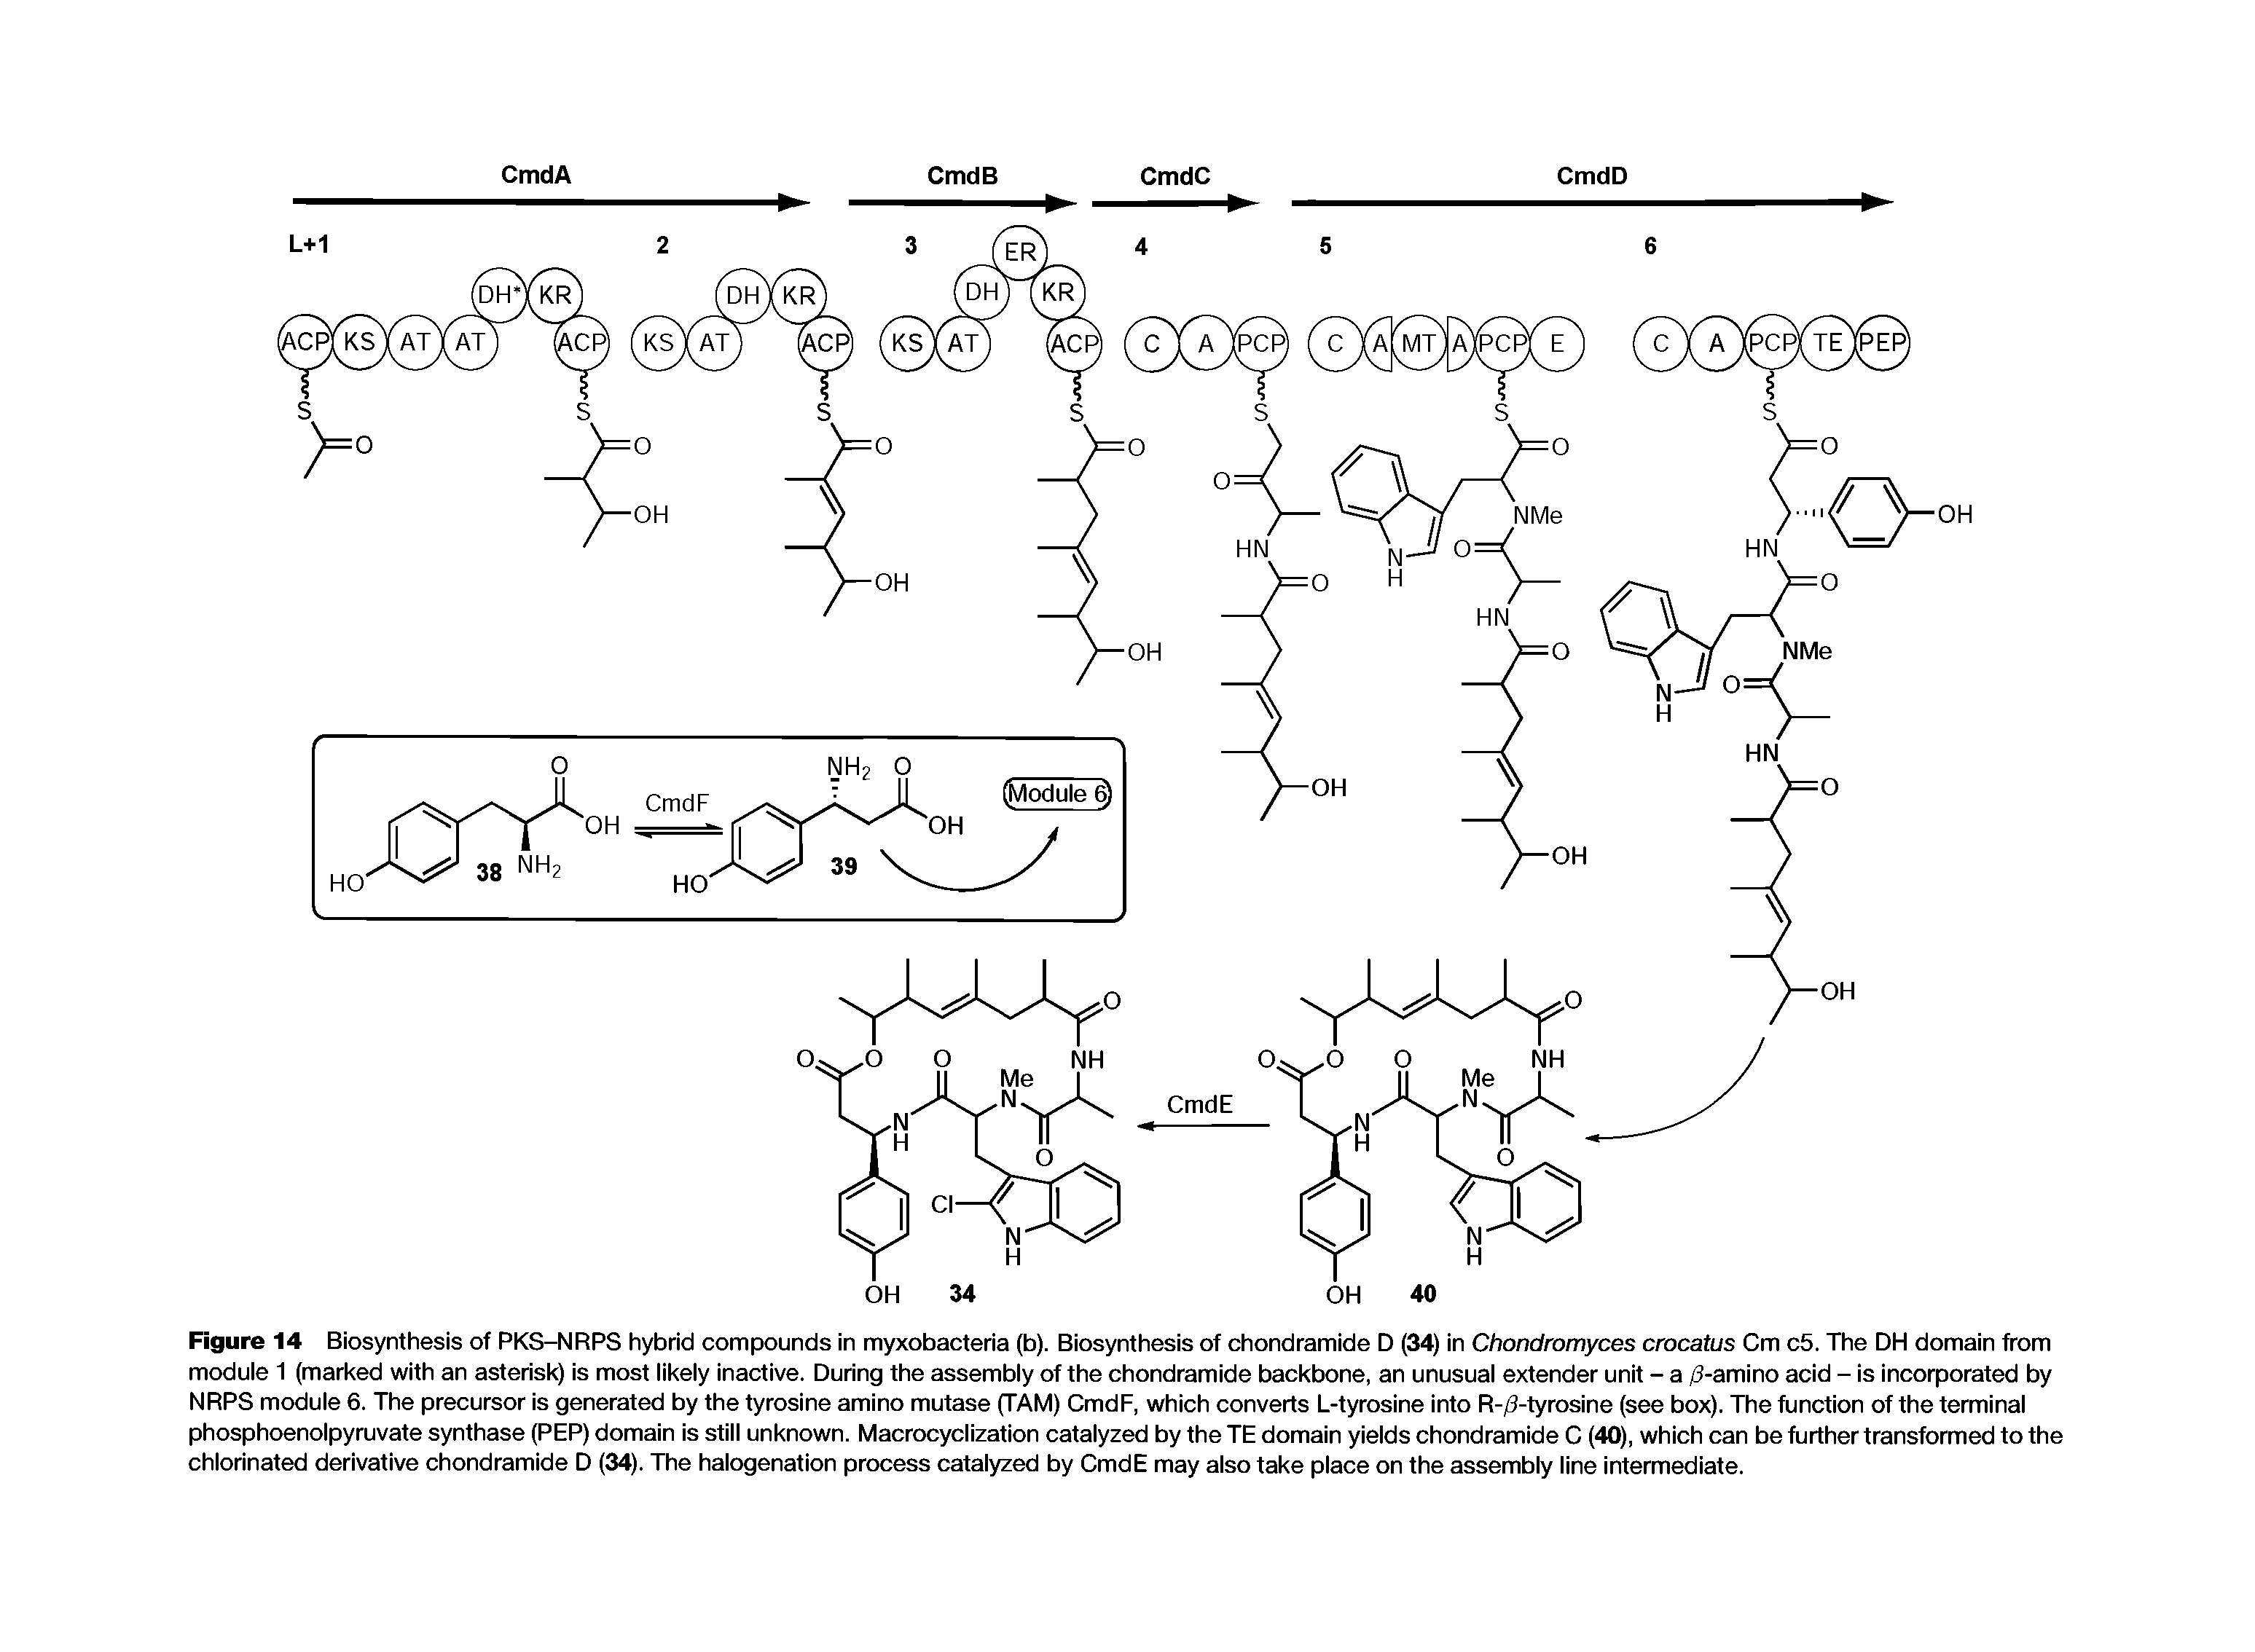 Figure 14 Biosynthesis of PKS-NRPS hybrid compounds in myxobacteria (b). Biosynthesis of chondramide D (34) in Chondromyces crocatus Cm c5. The DH domain from module 1 (marked with an asterisk) is most likely inactive. During the assembly of the chondramide backbone, an unusual extender unit - a /3-amino acid - is incorporated by NRPS module 6. The precursor is generated by the tyrosine amino mutase (TAM) CmdF, which converts L-tyrosine into R-/3-tyrosine (see box). The function of the terminal phosphoenolpyruvate synthase (PEP) domain is still unknown. Macrocyclization catalyzed by the TE domain yields chondramide C (40), which can be further transformed to the chlorinated derivative chondramide D (34). The halogenation process catalyzed by CmdE may also take place on the assembly line intermediate.